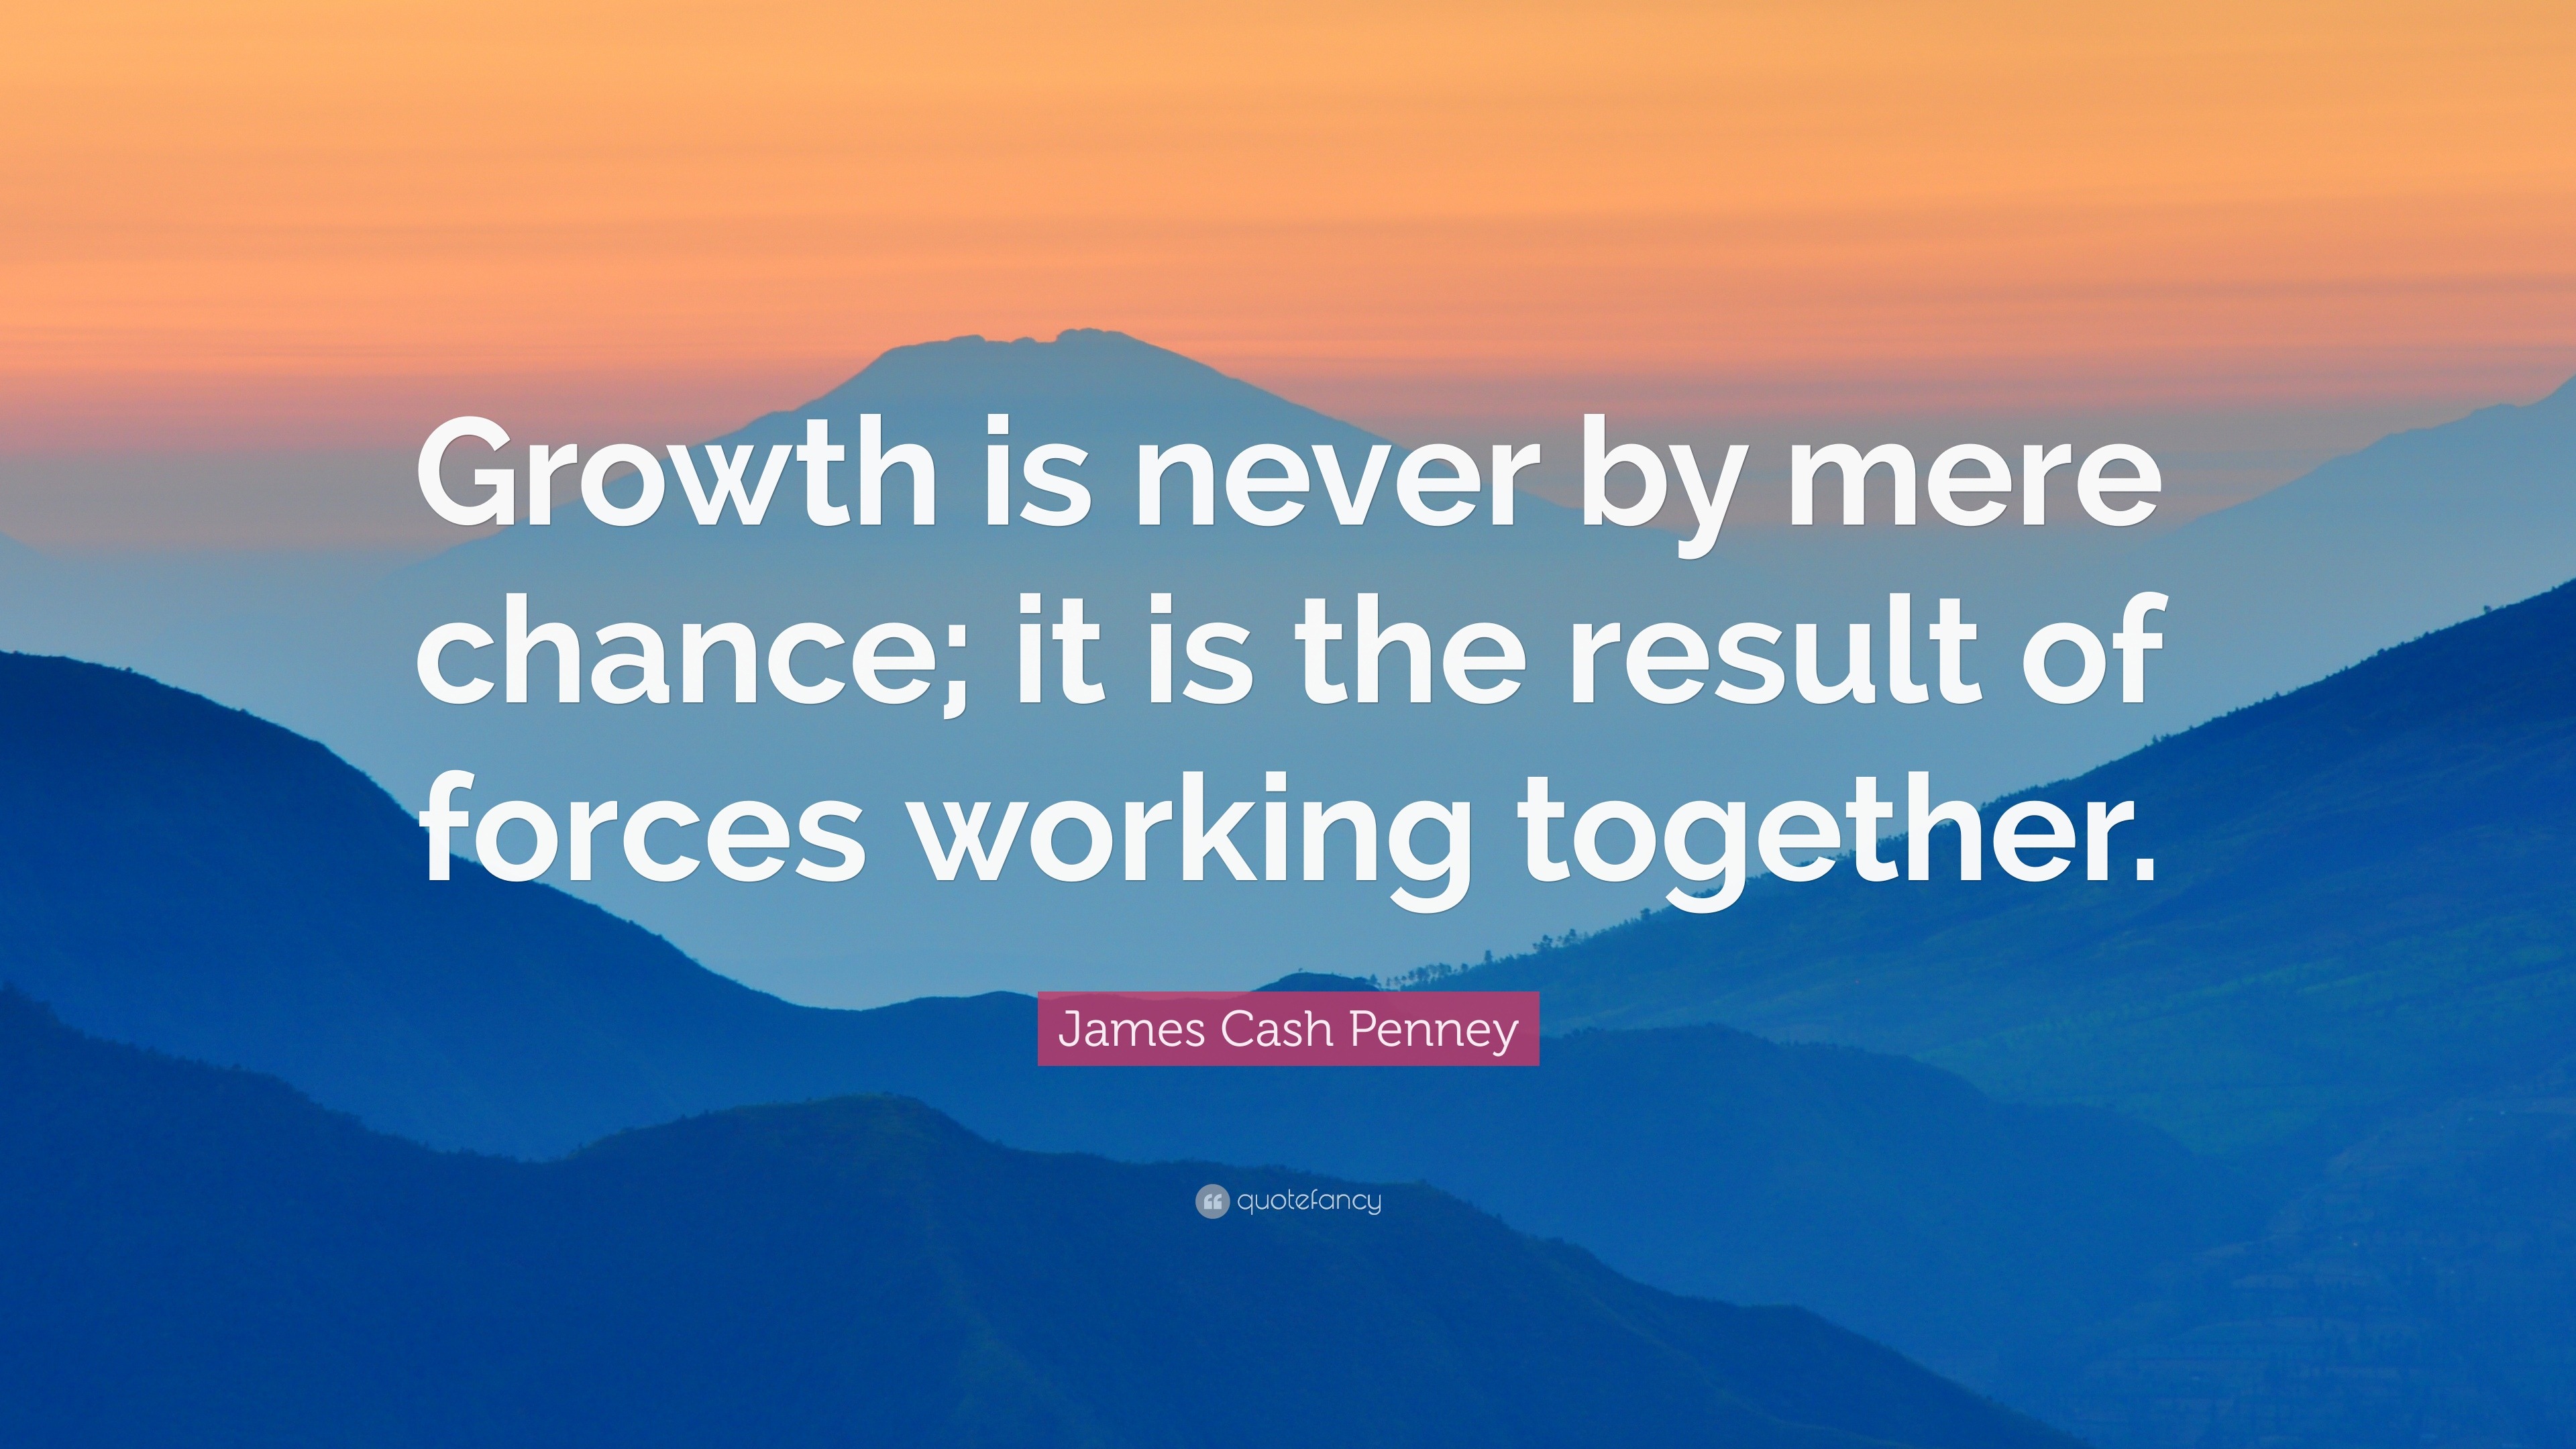 Business Quotes Change Growth - Management And Leadership